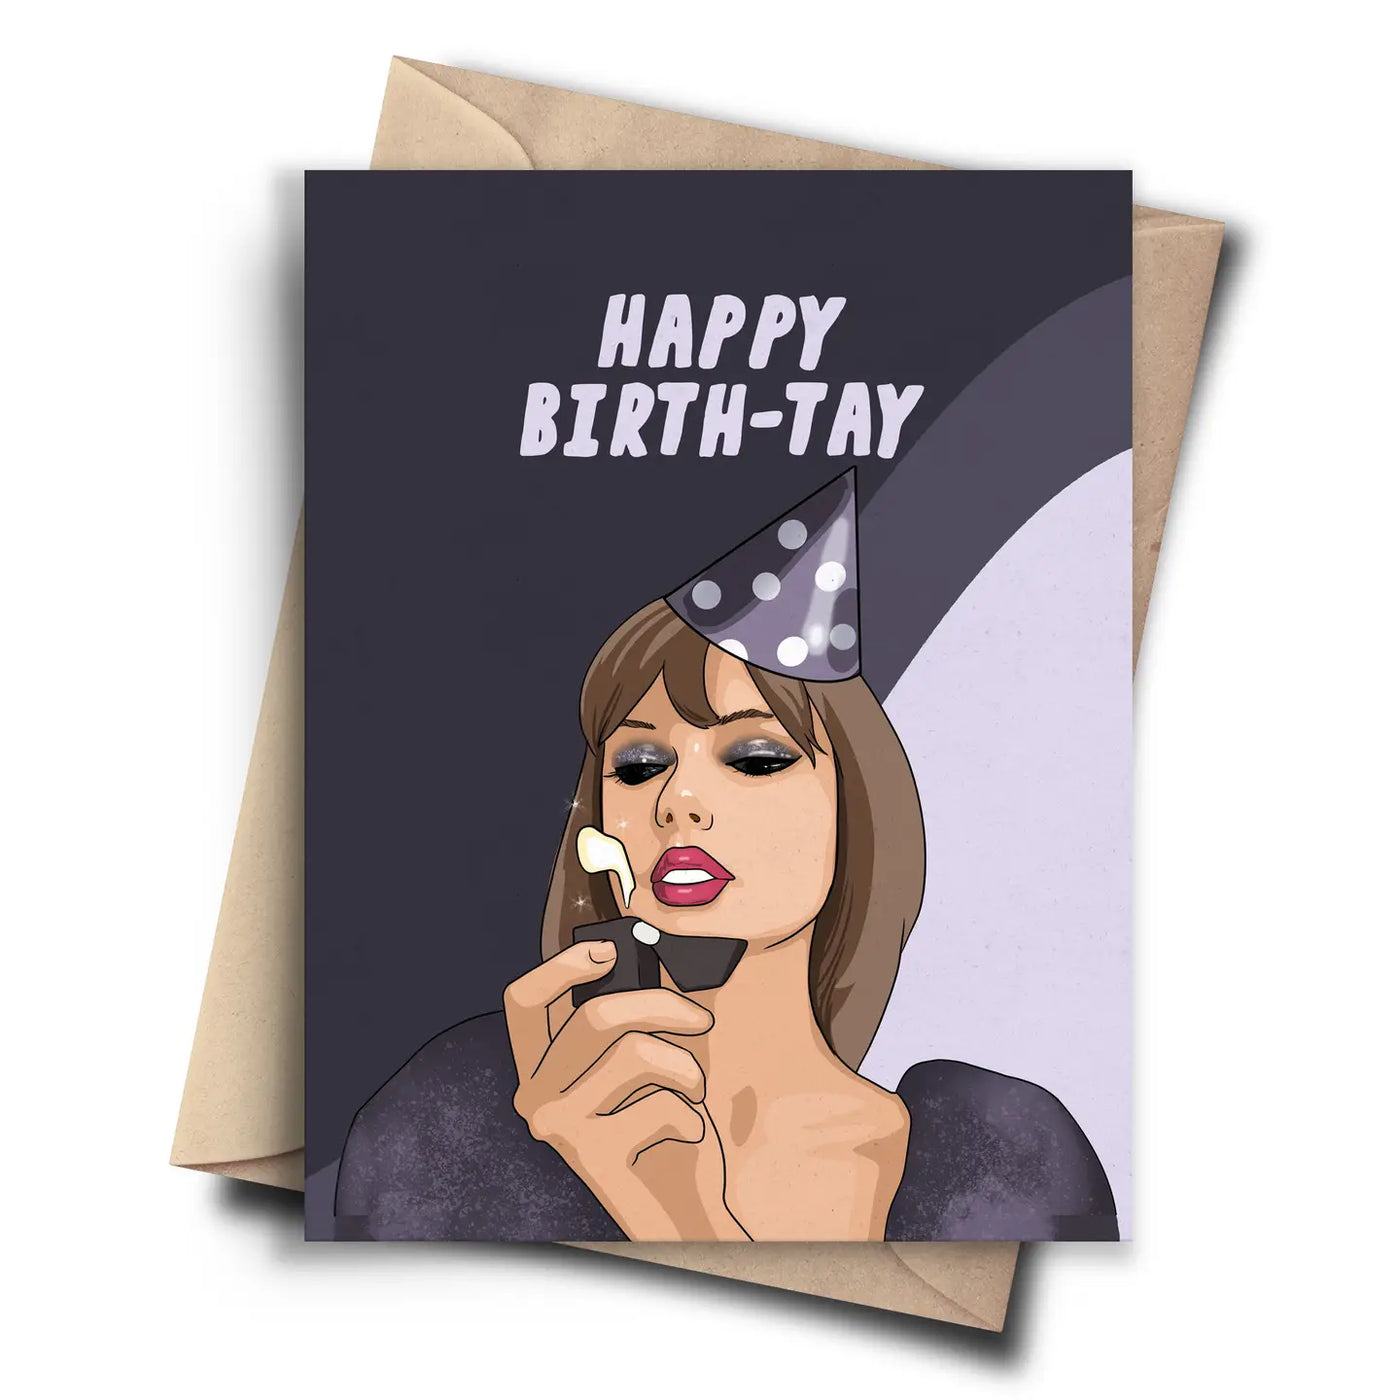 Taylor Swift Assorted Cards + More Options